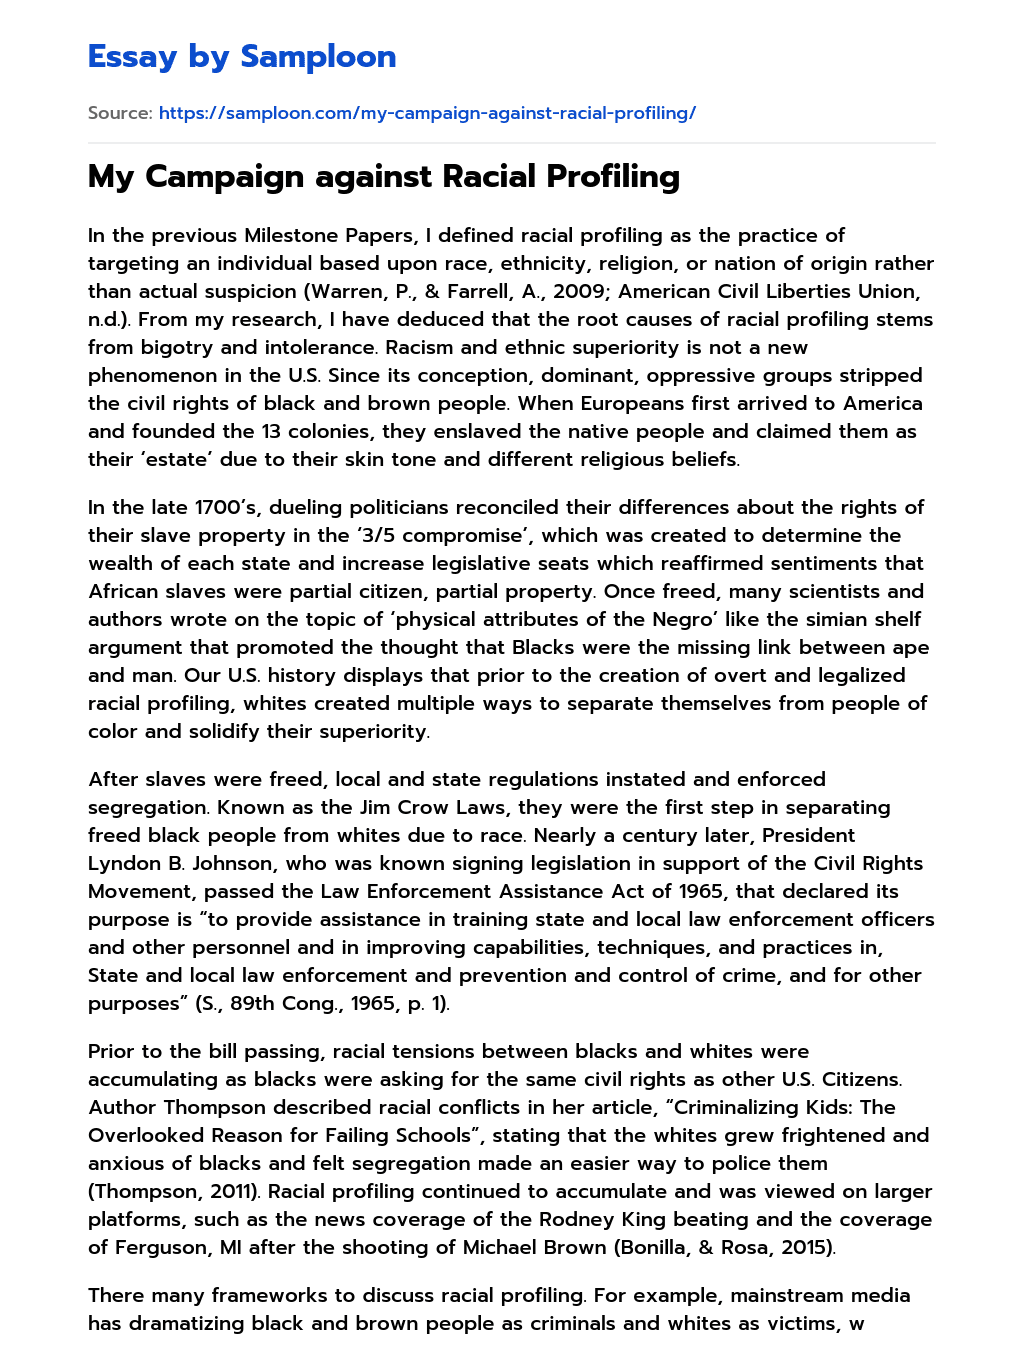 My Campaign against Racial Profiling essay